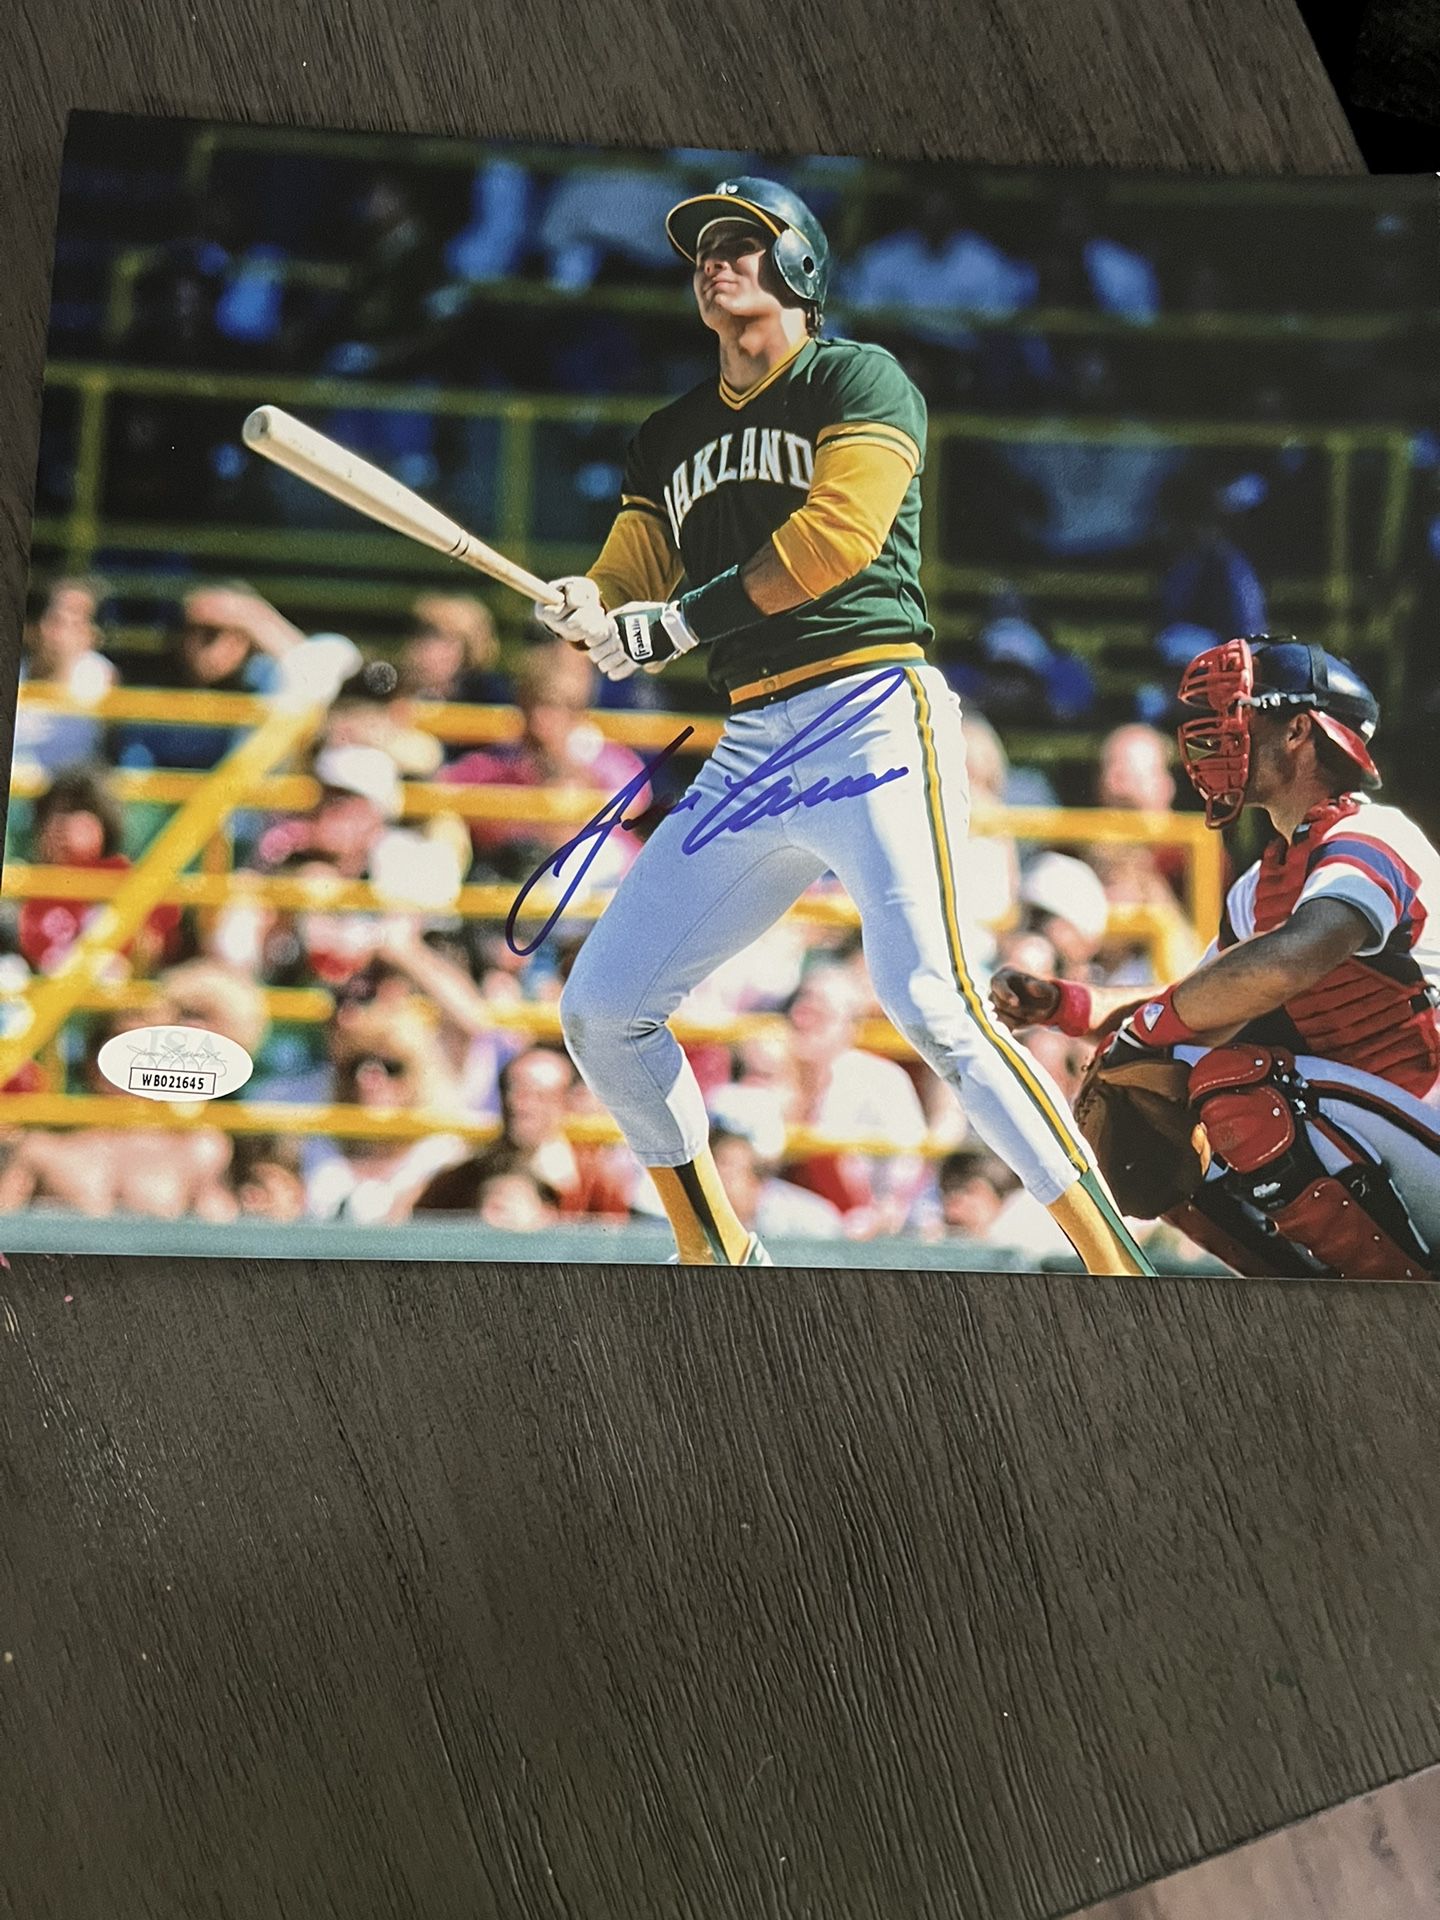 Jose Canseco Autographed 8x10 